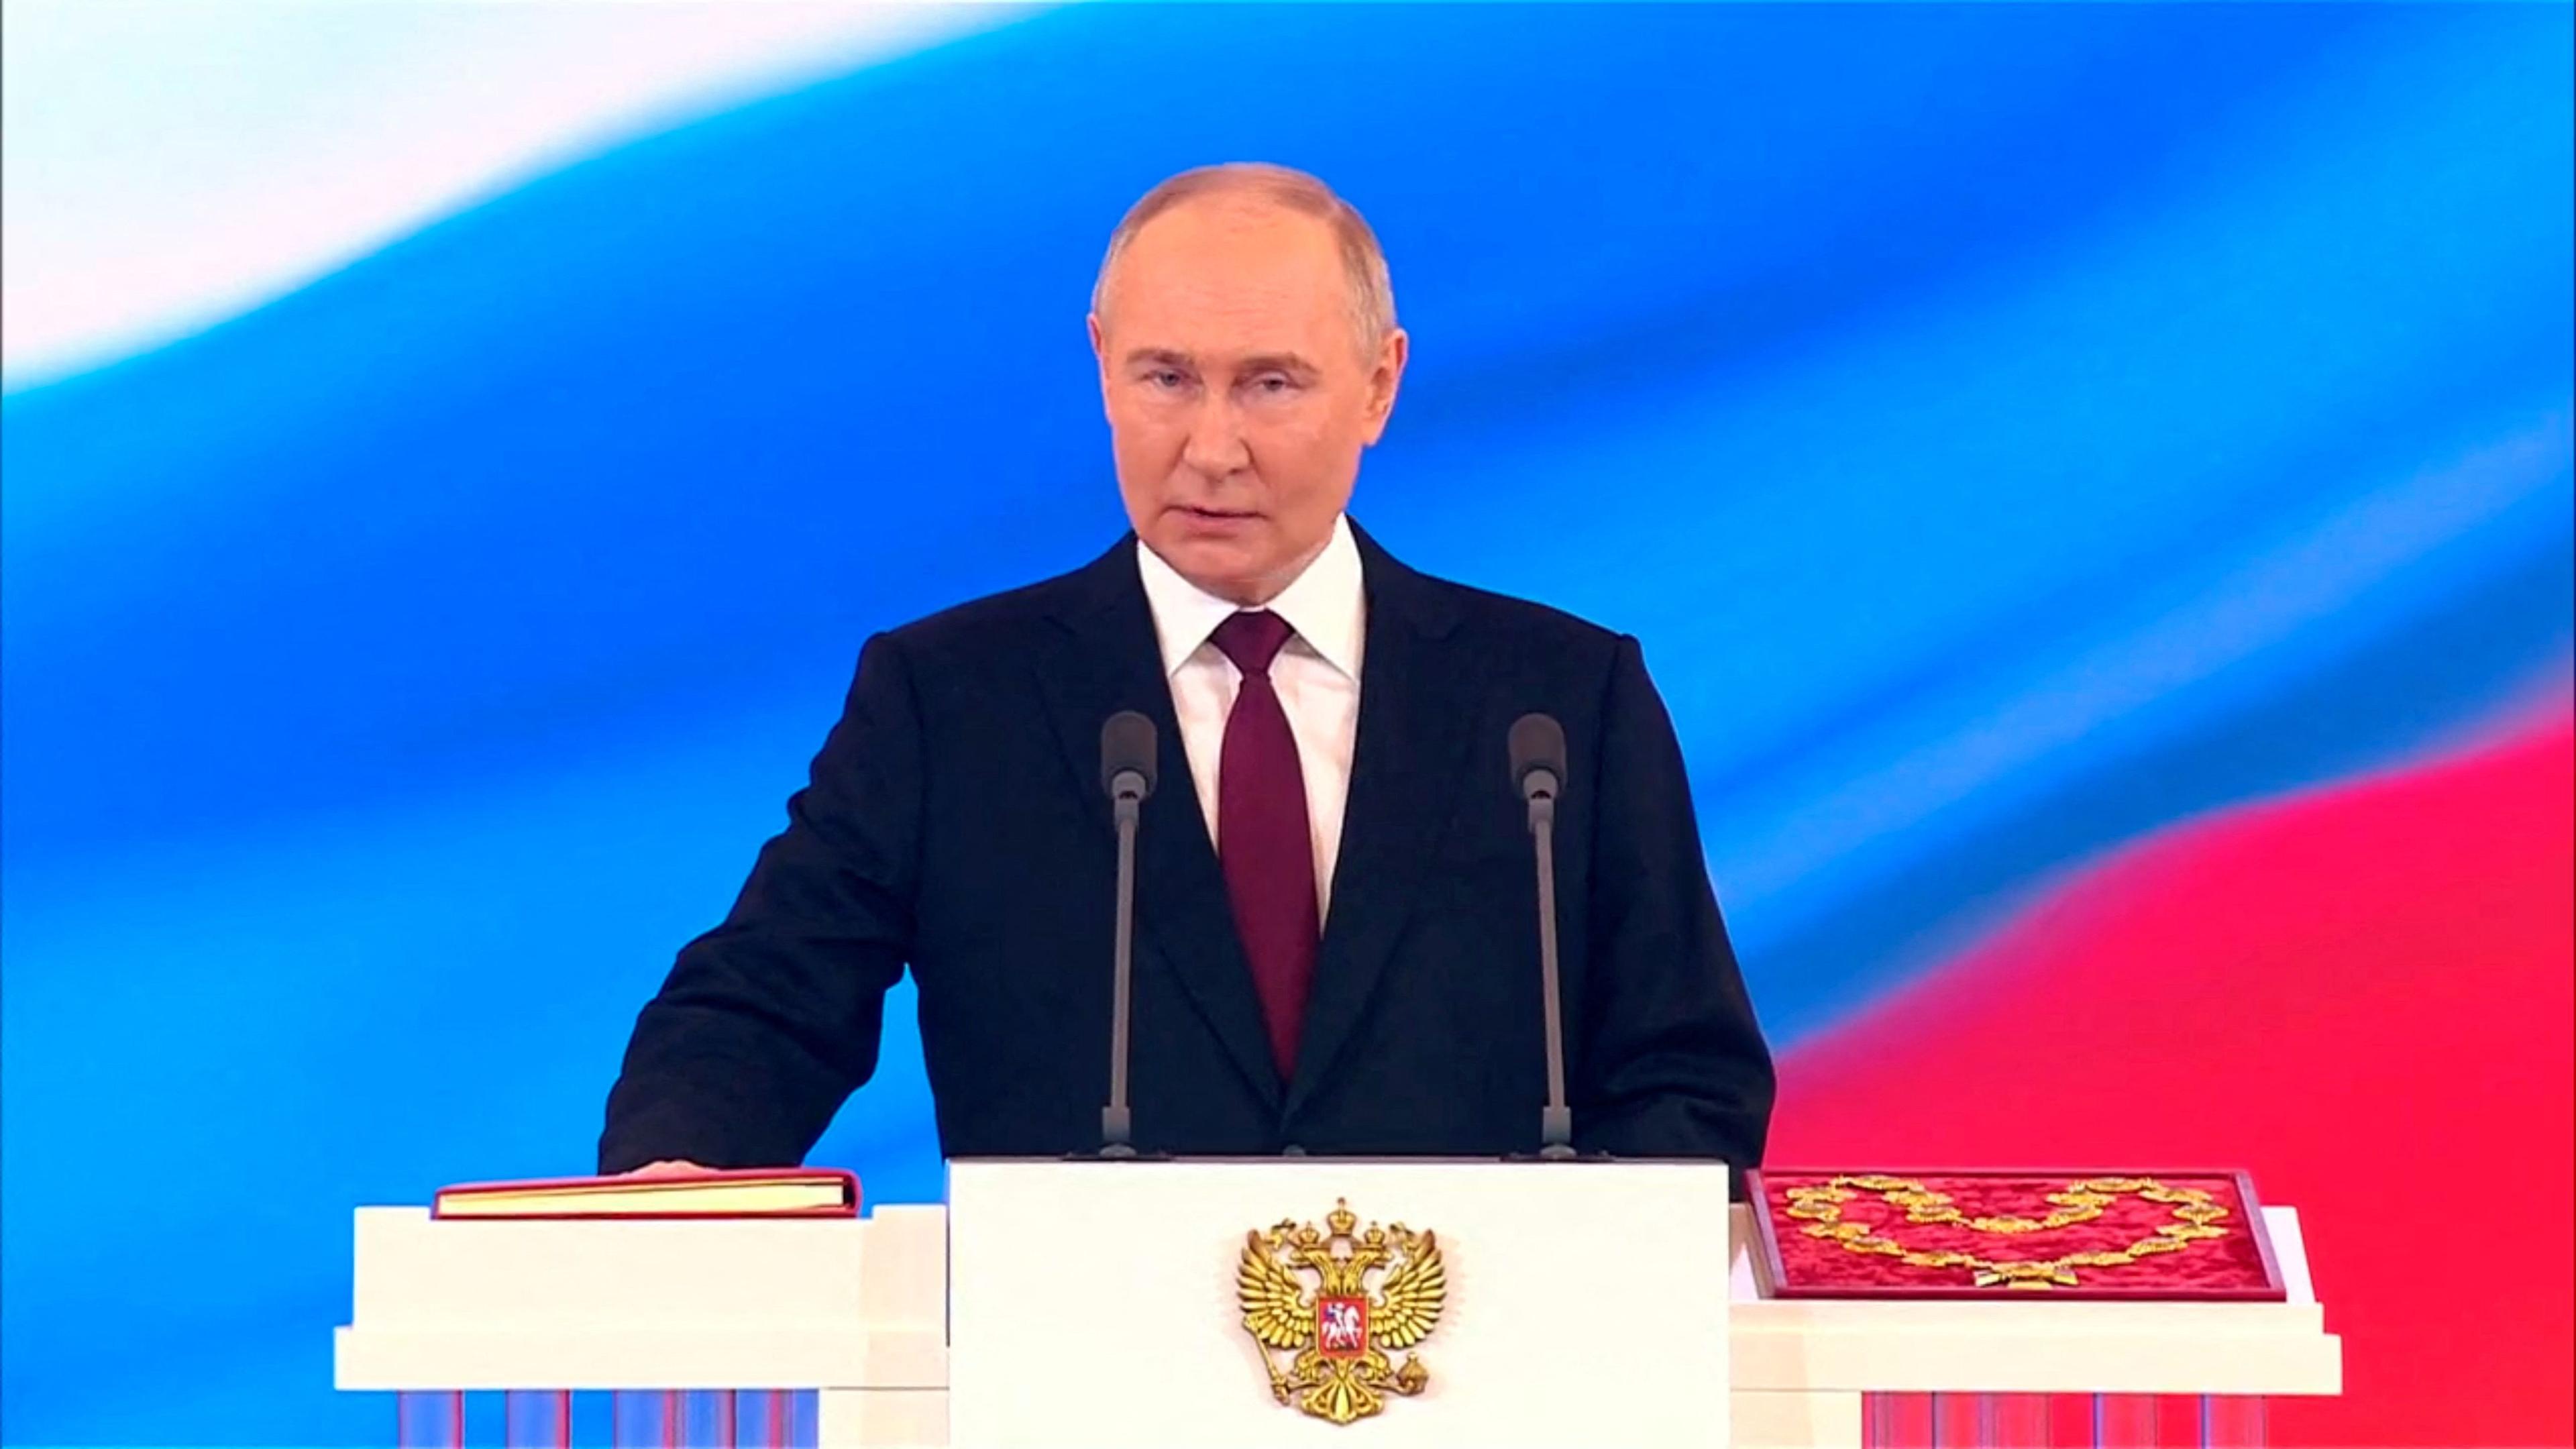 Putin officially takes office as President of Russia